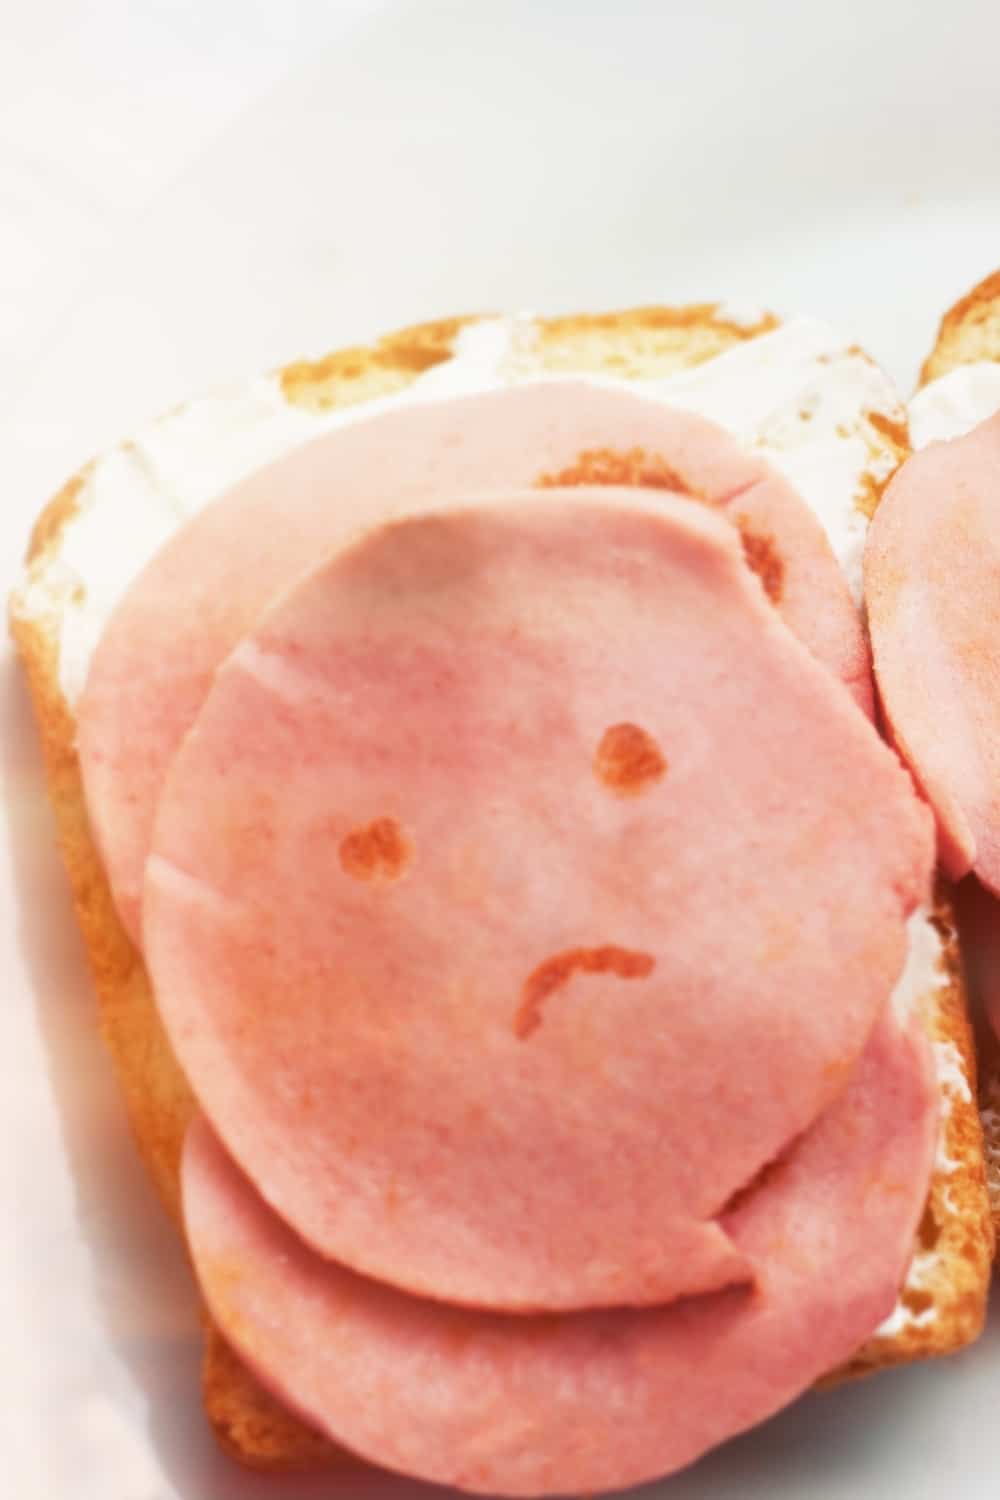 lunch meat gone bad, sad smiley face